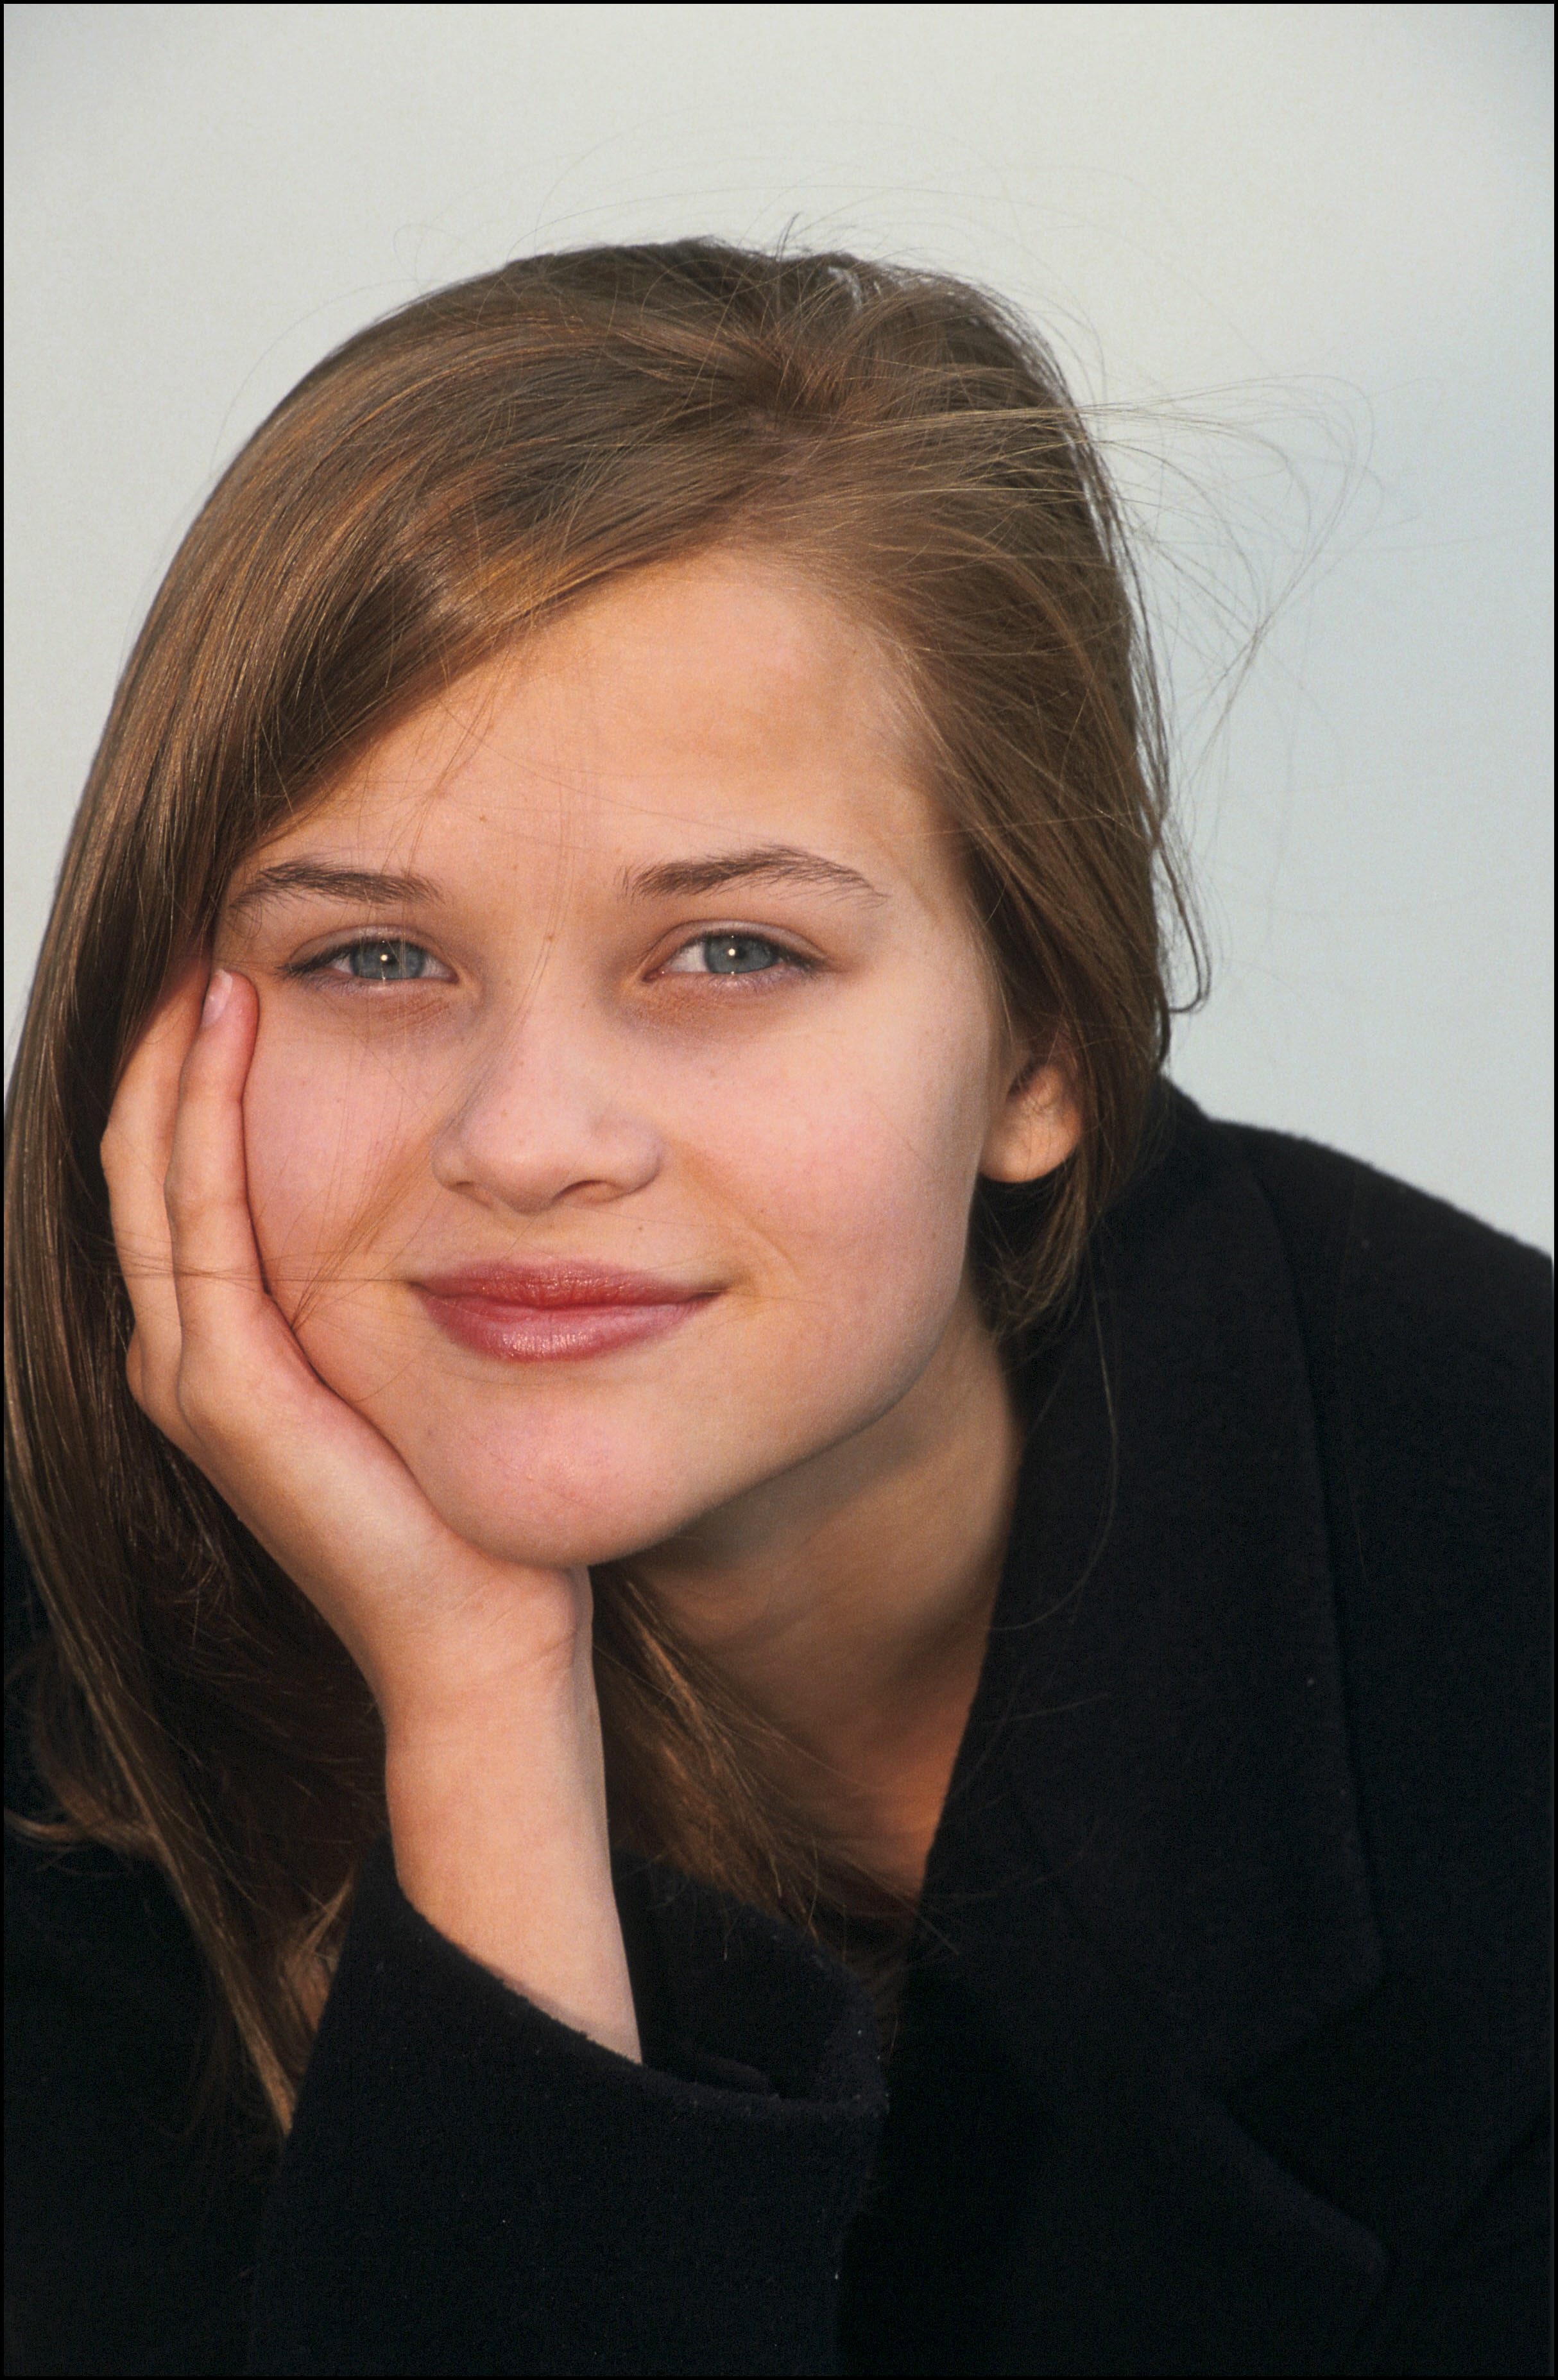 Reese Witherspoon le 8 septembre 1991 à Deauville, France | Source : Getty Images